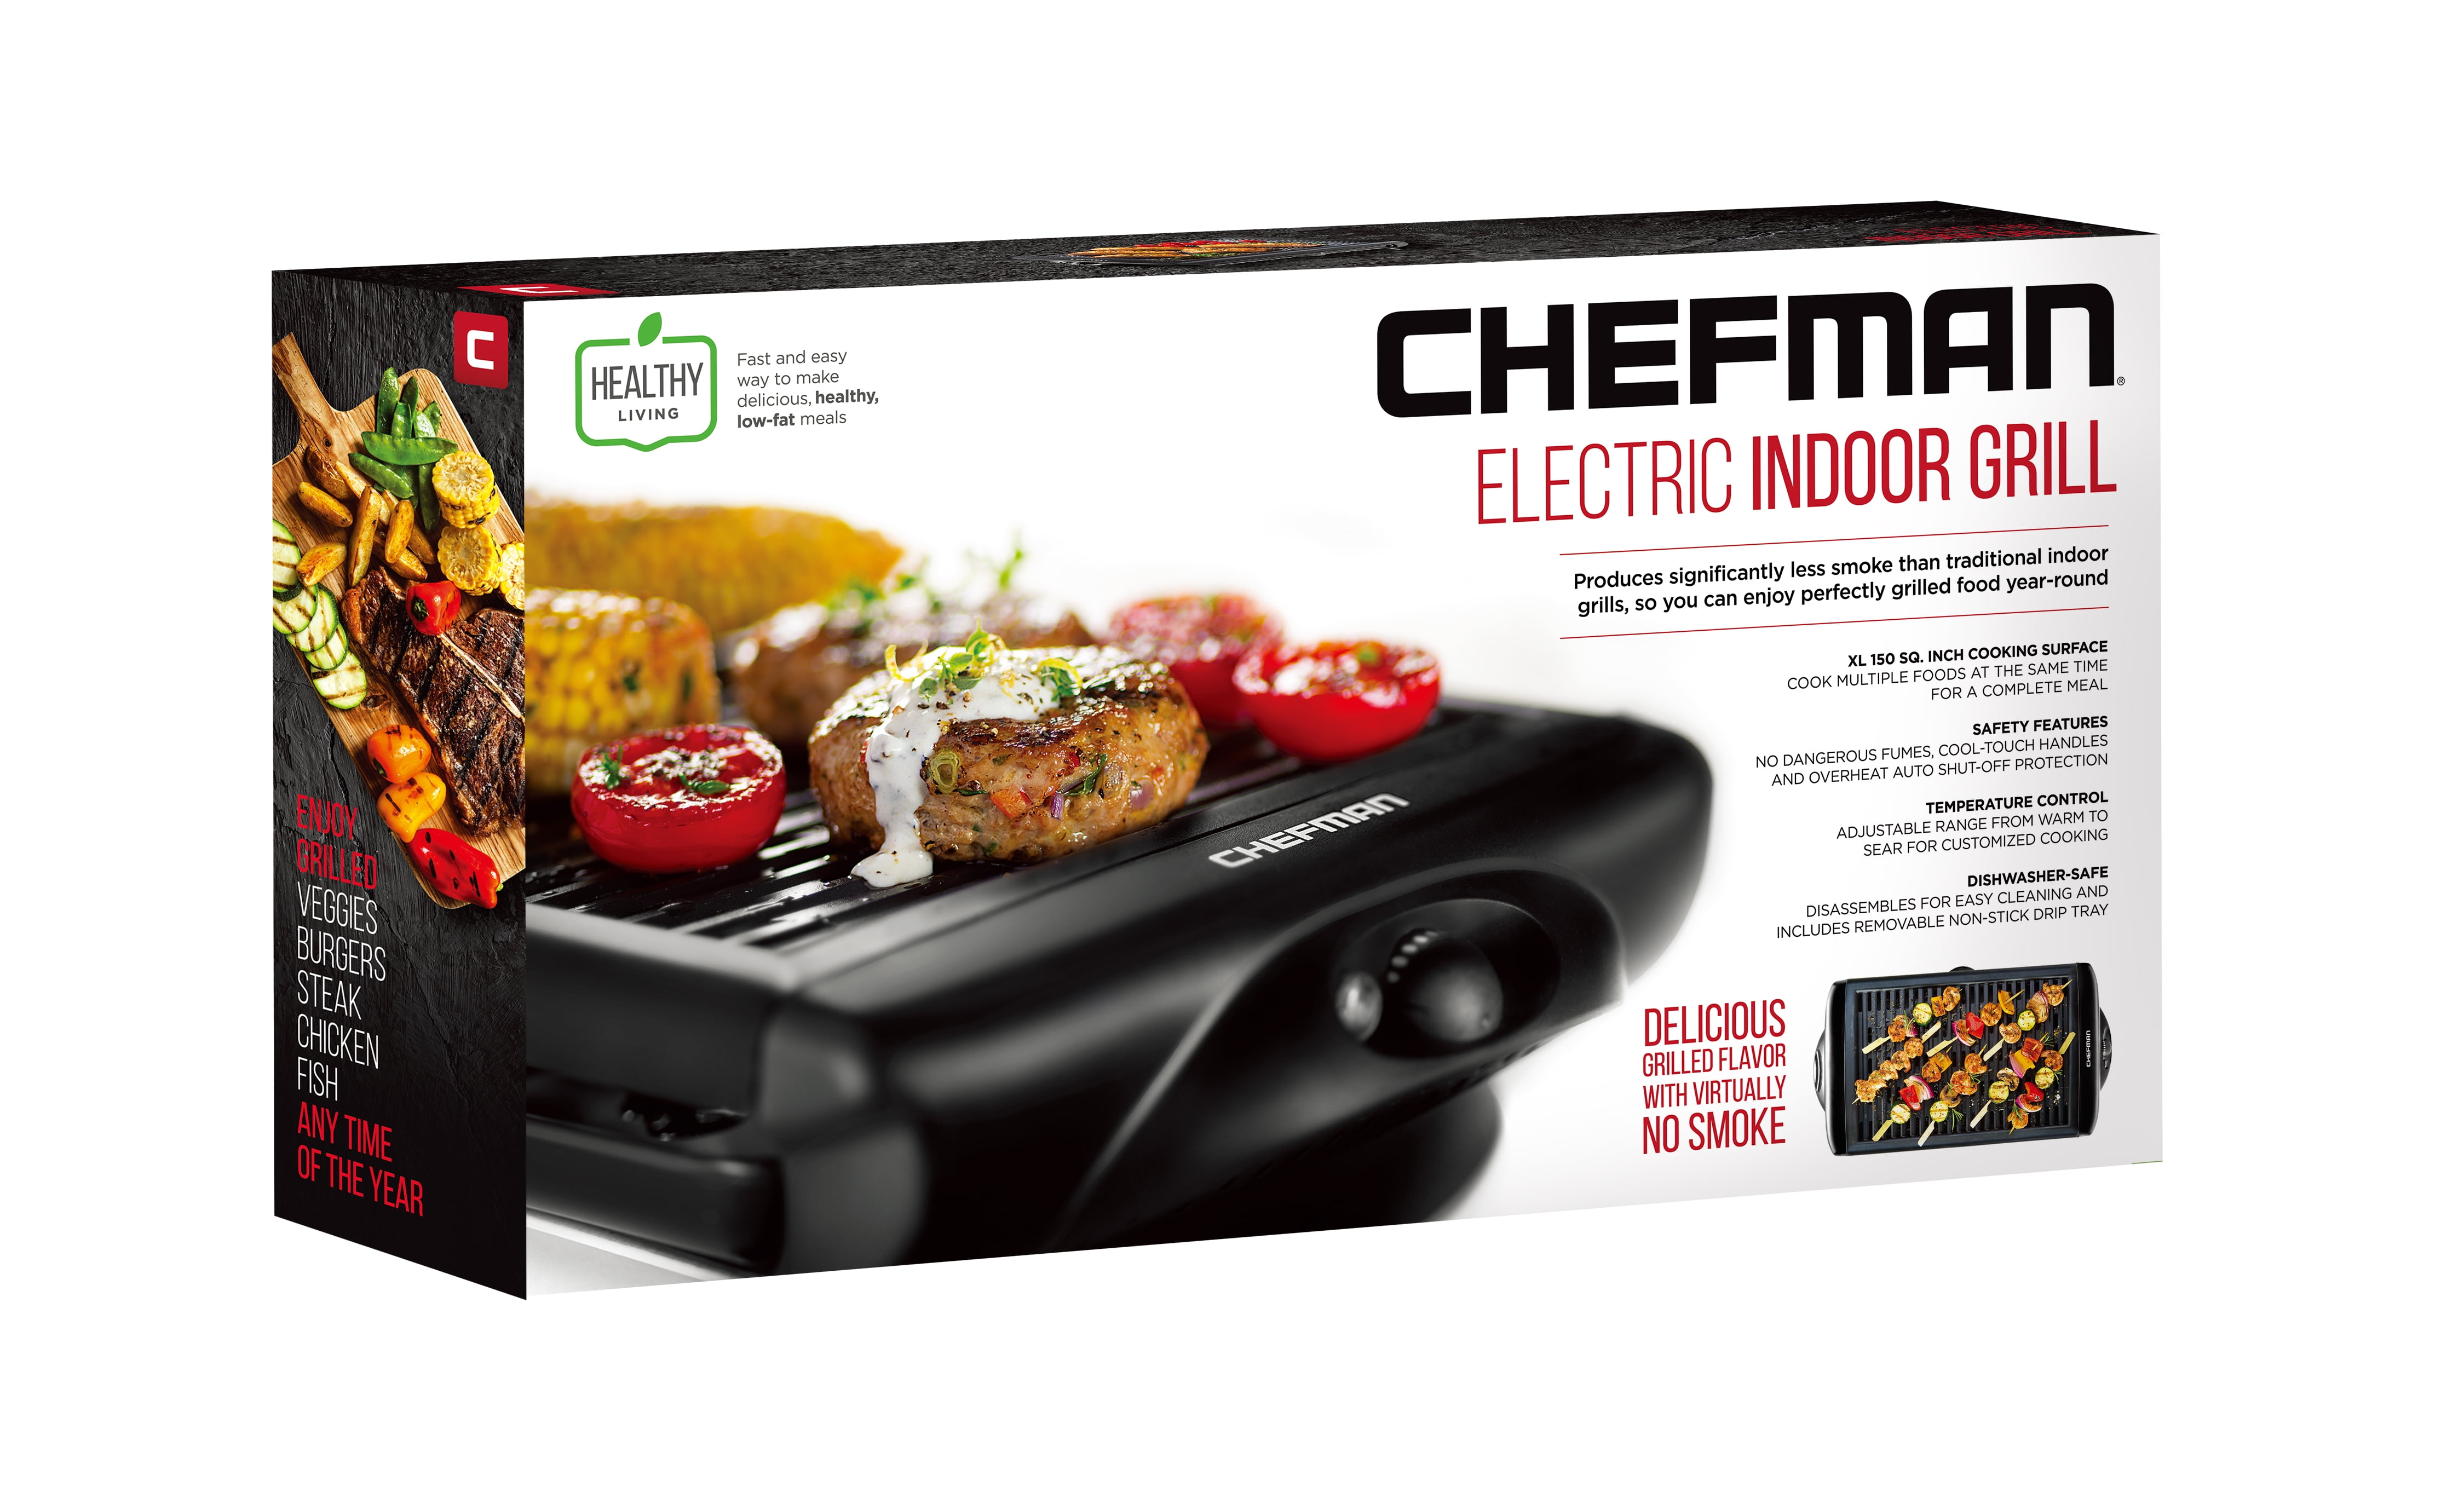 Chefman AccuGrill Smokeless Indoor Grill with Removable Temperature Probe,  1500W, Black